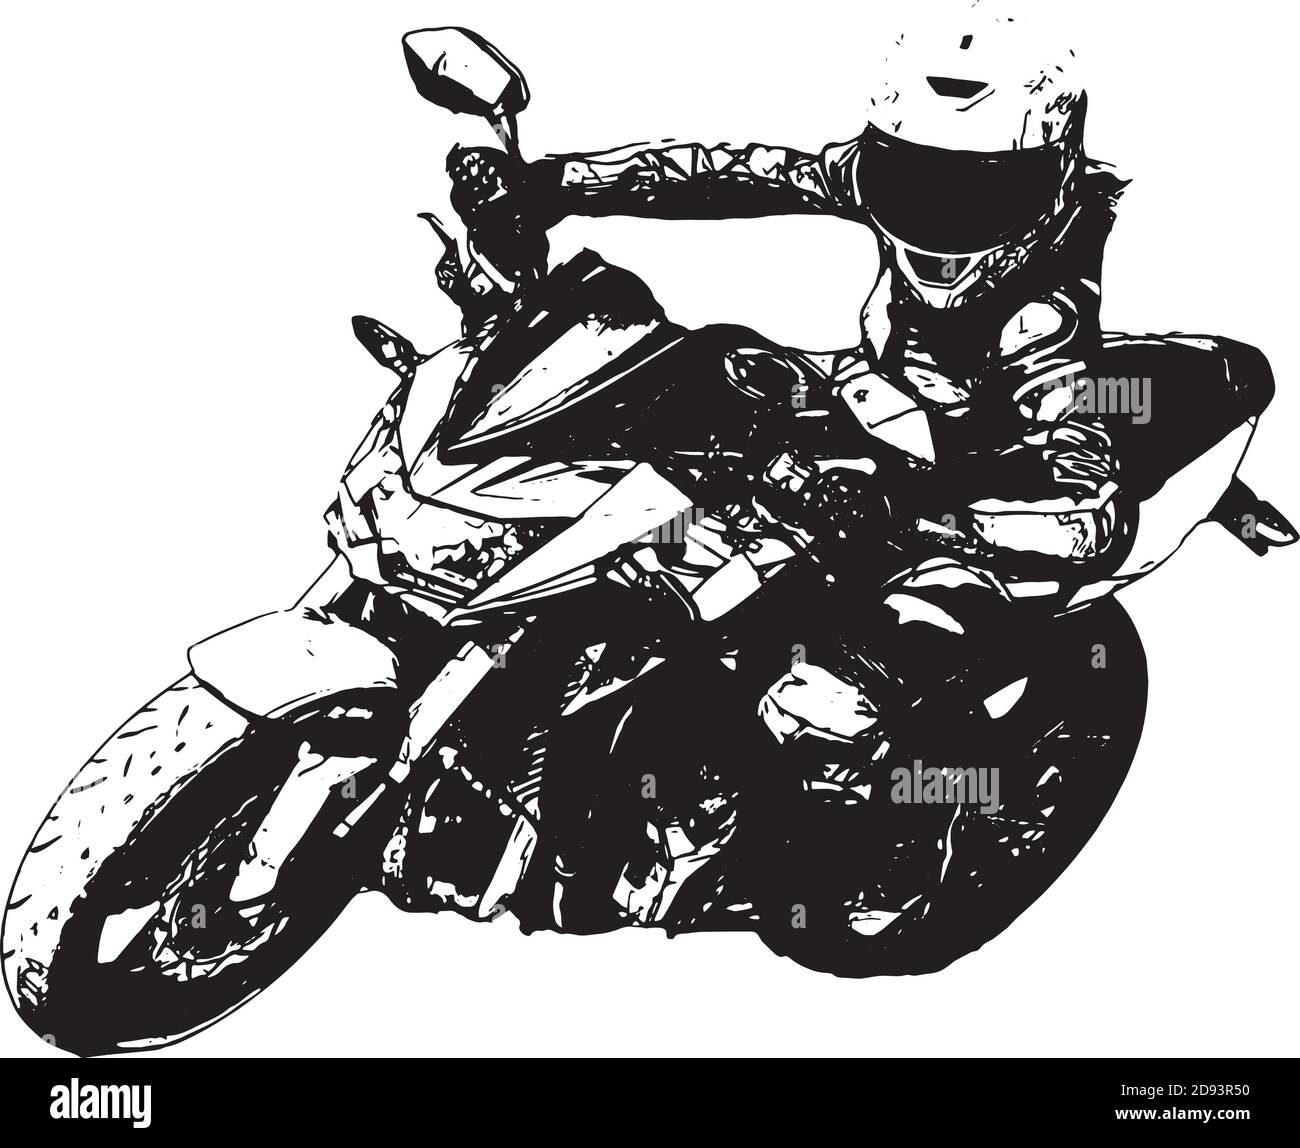 Motorcycle icon or sign. Vector black silhouette of bike or motorcycle. Stock Vector